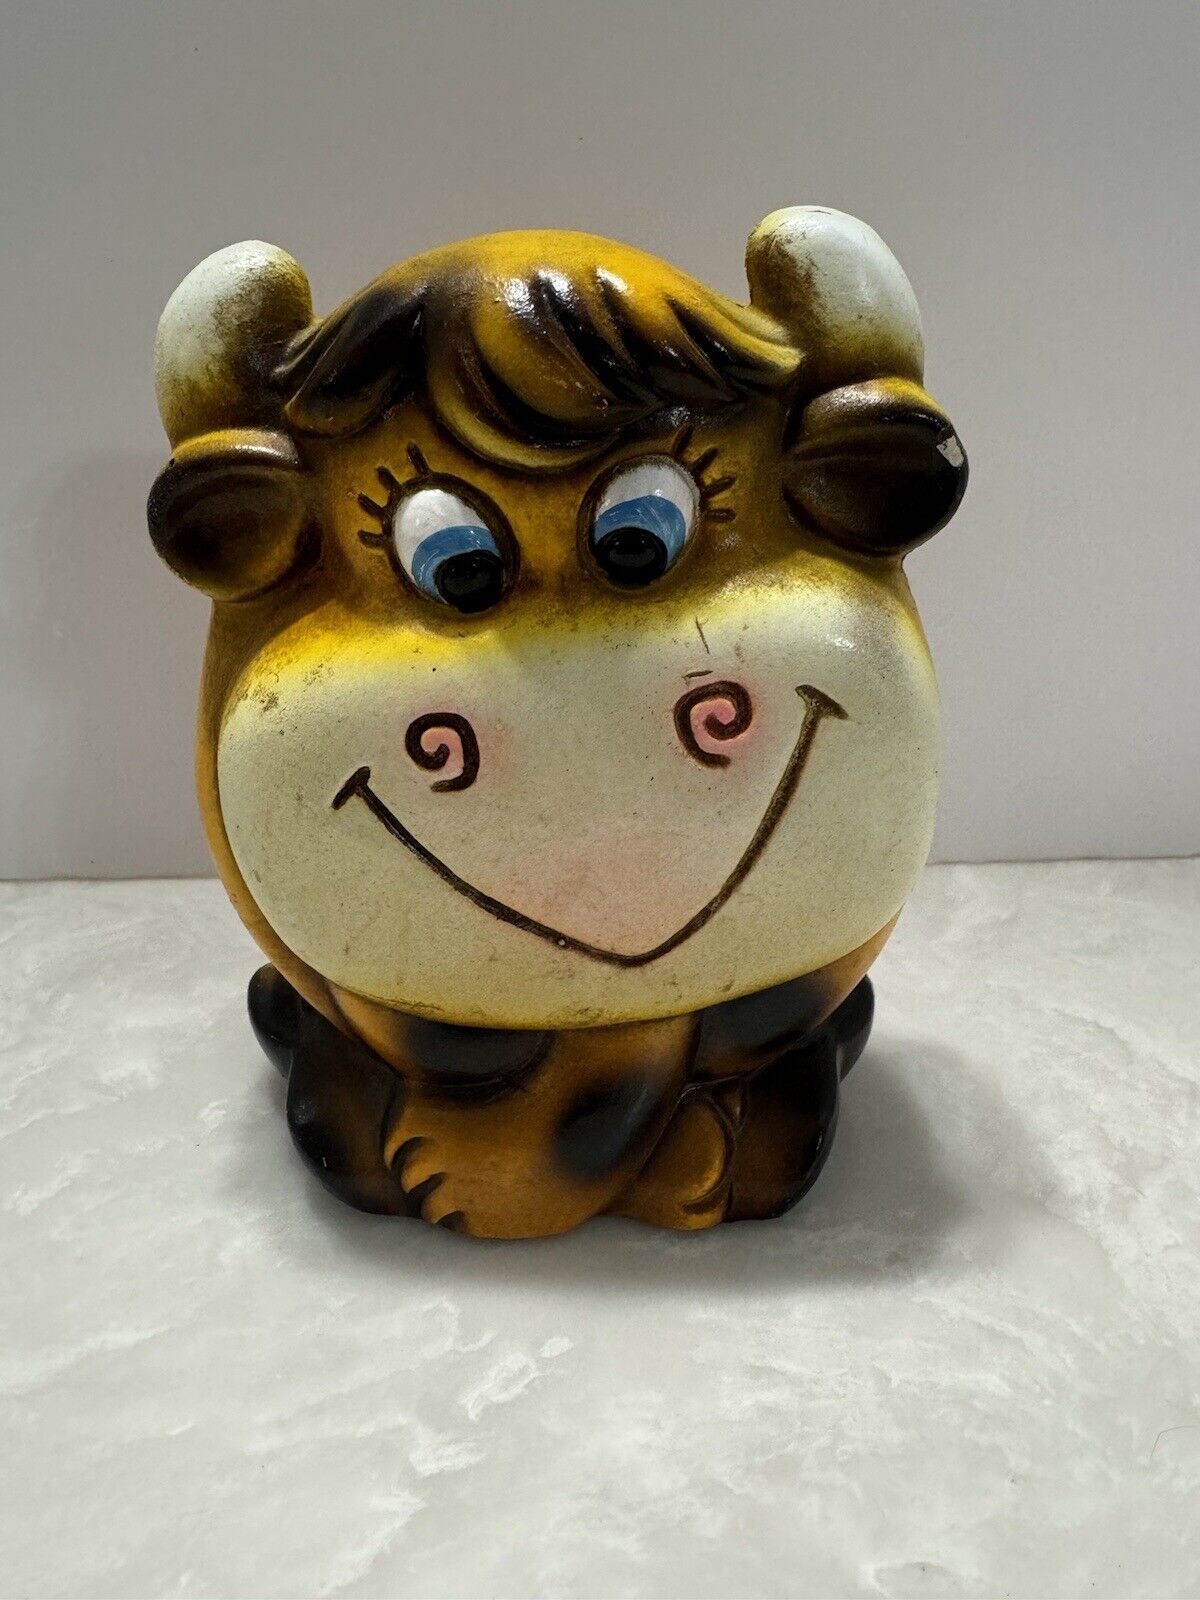 Vintage Enesco Coin Bank Happy Cow Bull Piggy Bank Ceramic 1960s? Without Plug